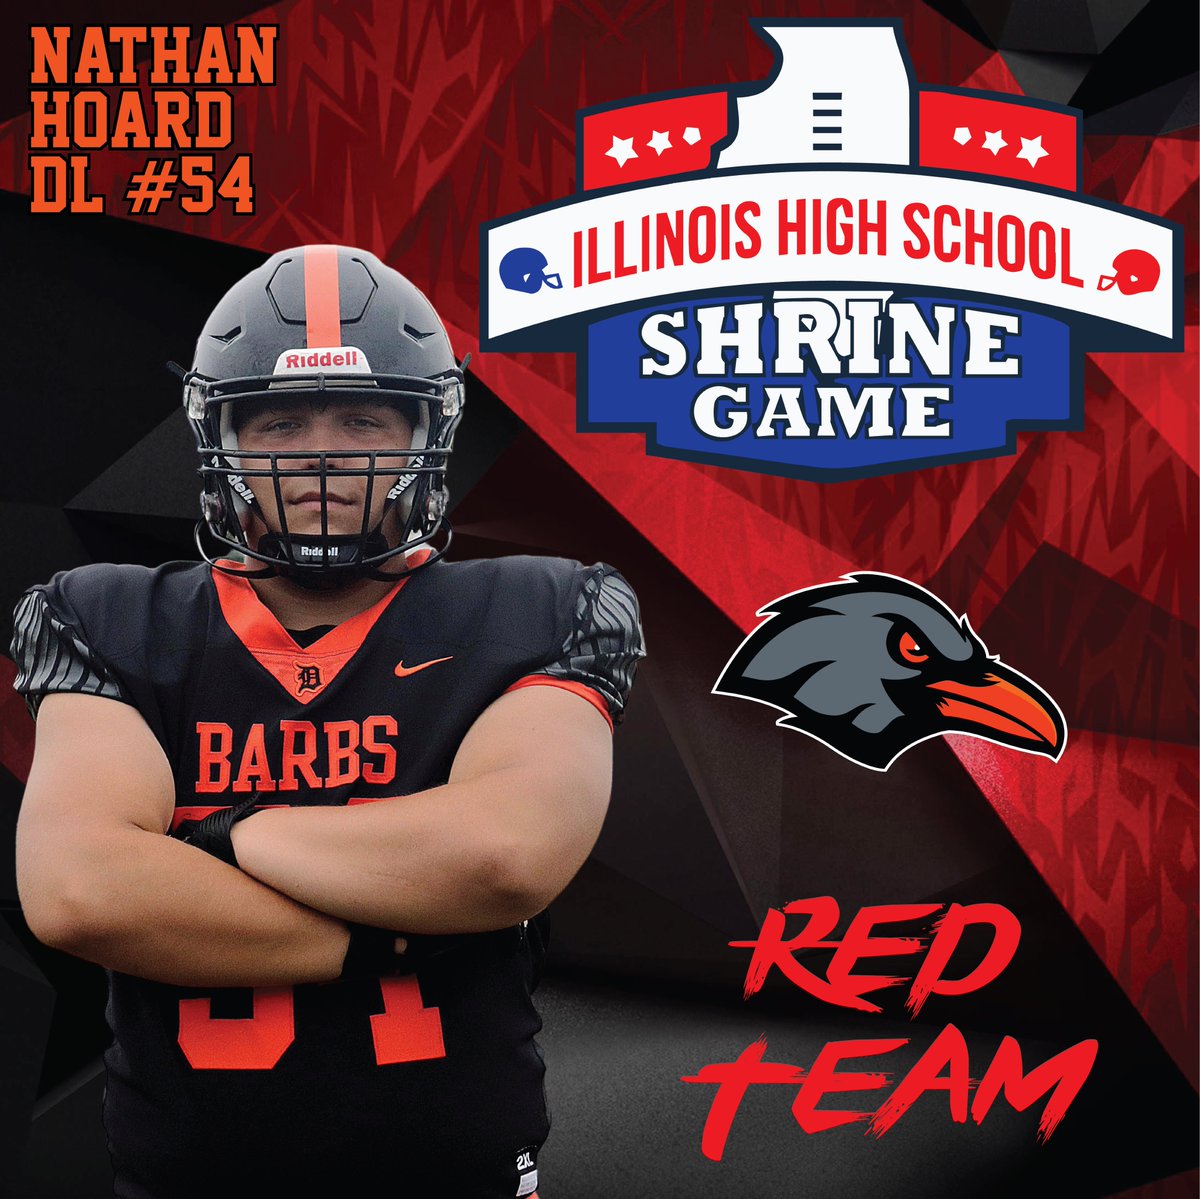 Congrats to Nathan Hoard for being selected to play in the Illinois Shrine Game! #TeamRed